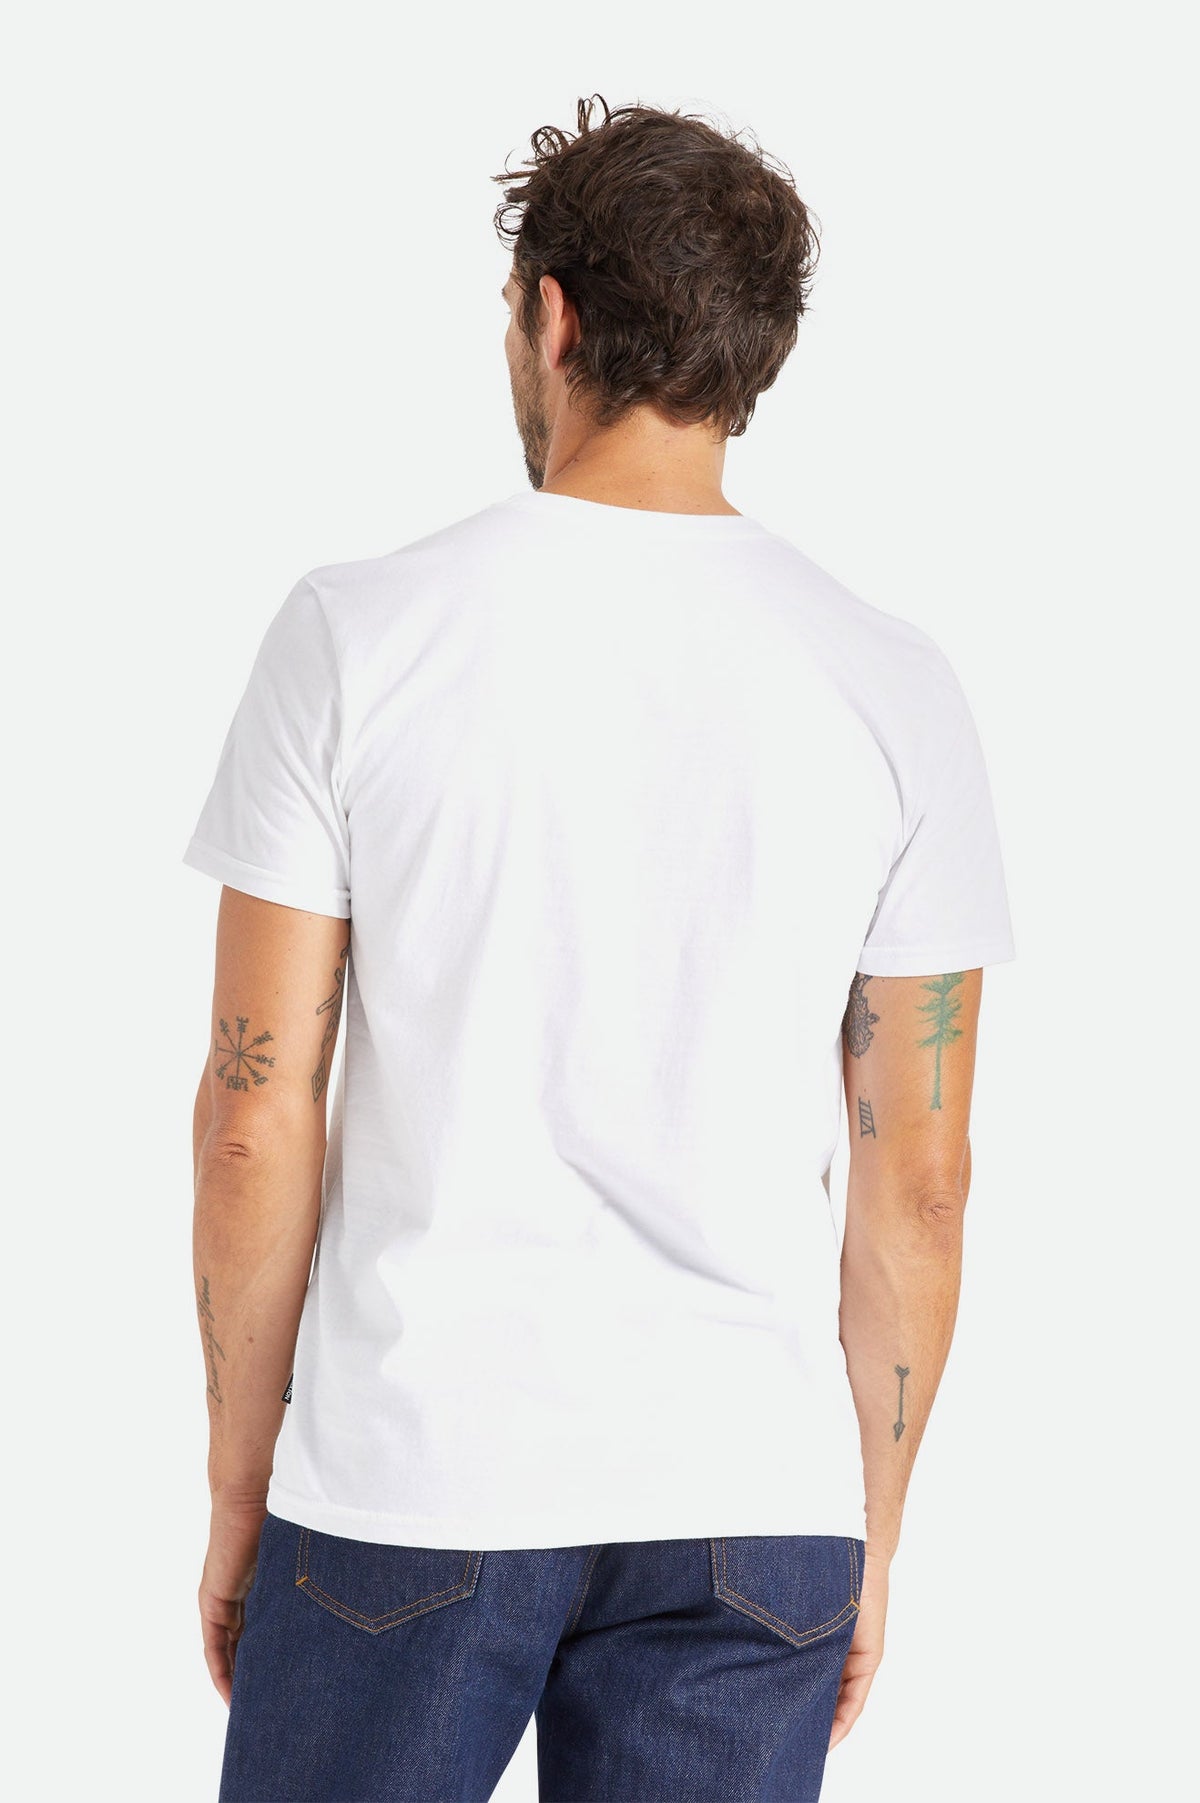 Willie Nelson Road Again S/S Tailored Tee - White